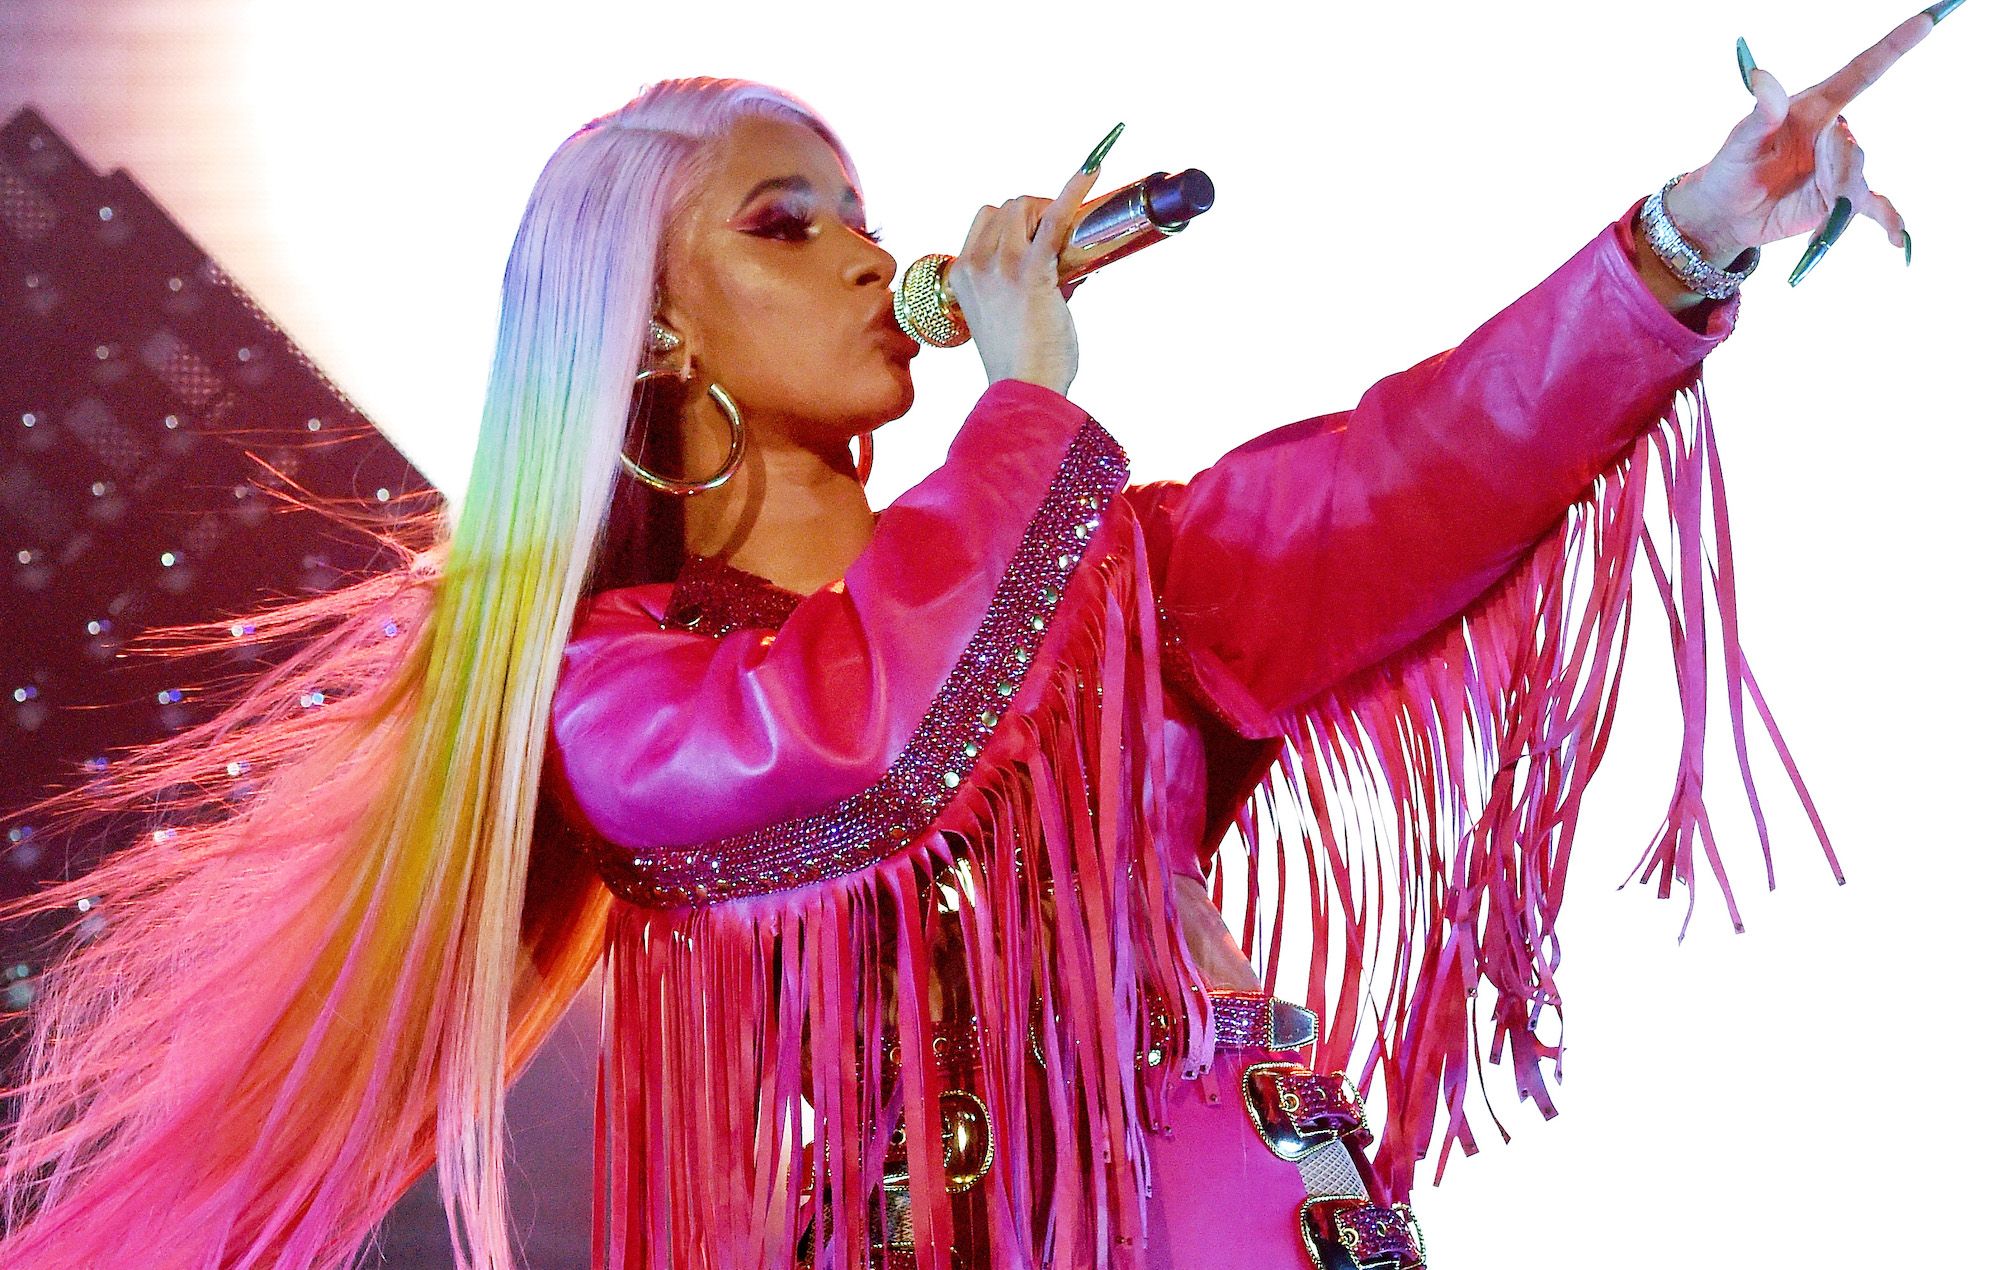 Cardi B pleads not guilty following indictment by Grand Jury in New York